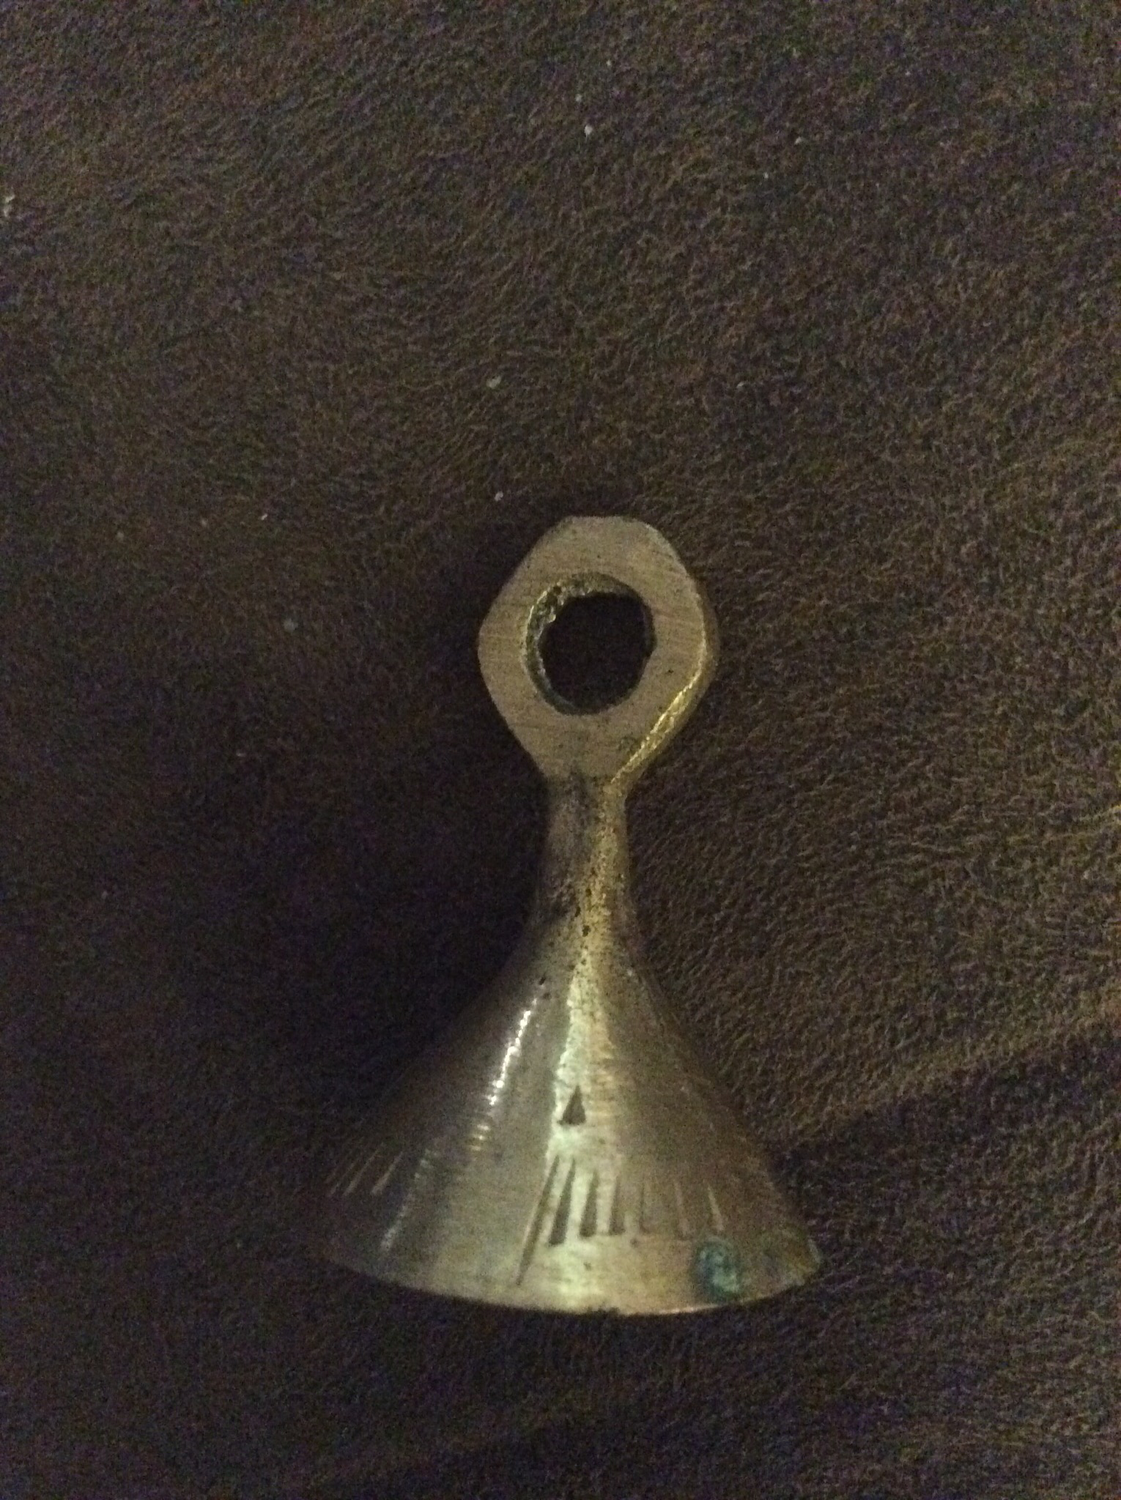 Bell ring to cleanse purify sanctify rooms places areas essences energies therein 